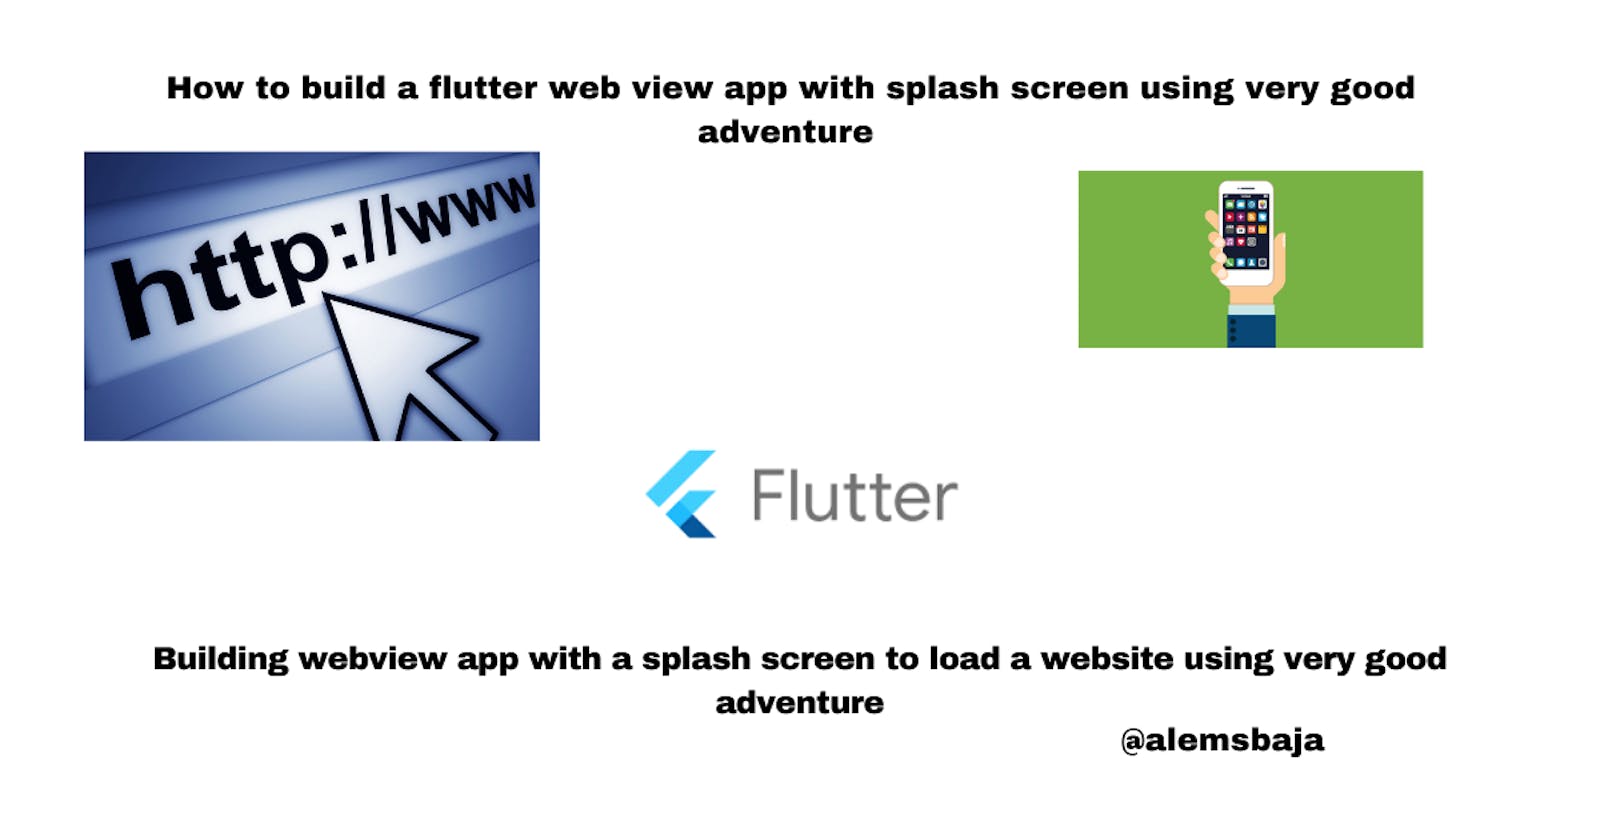 How to build a flutter web view app with splash screen using very good adventure